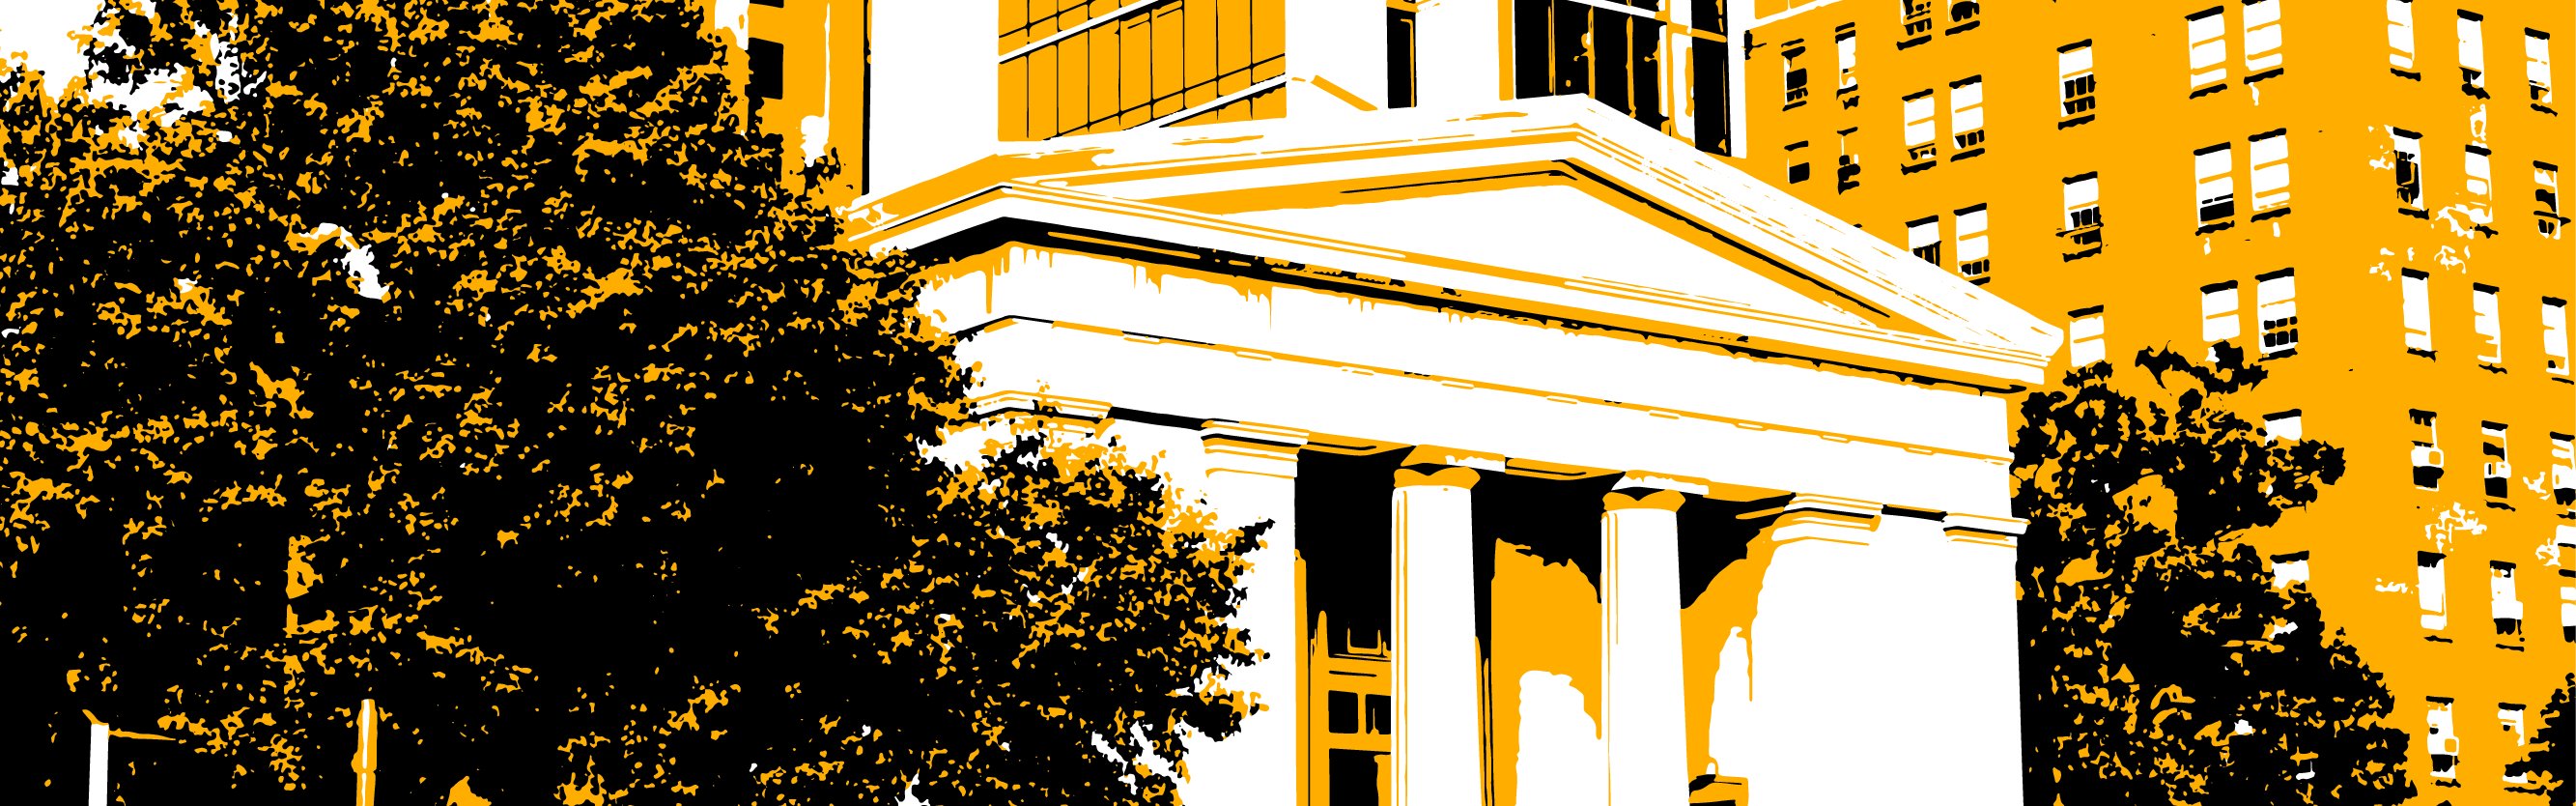 Stylized poster graphic of Hunton Student Center